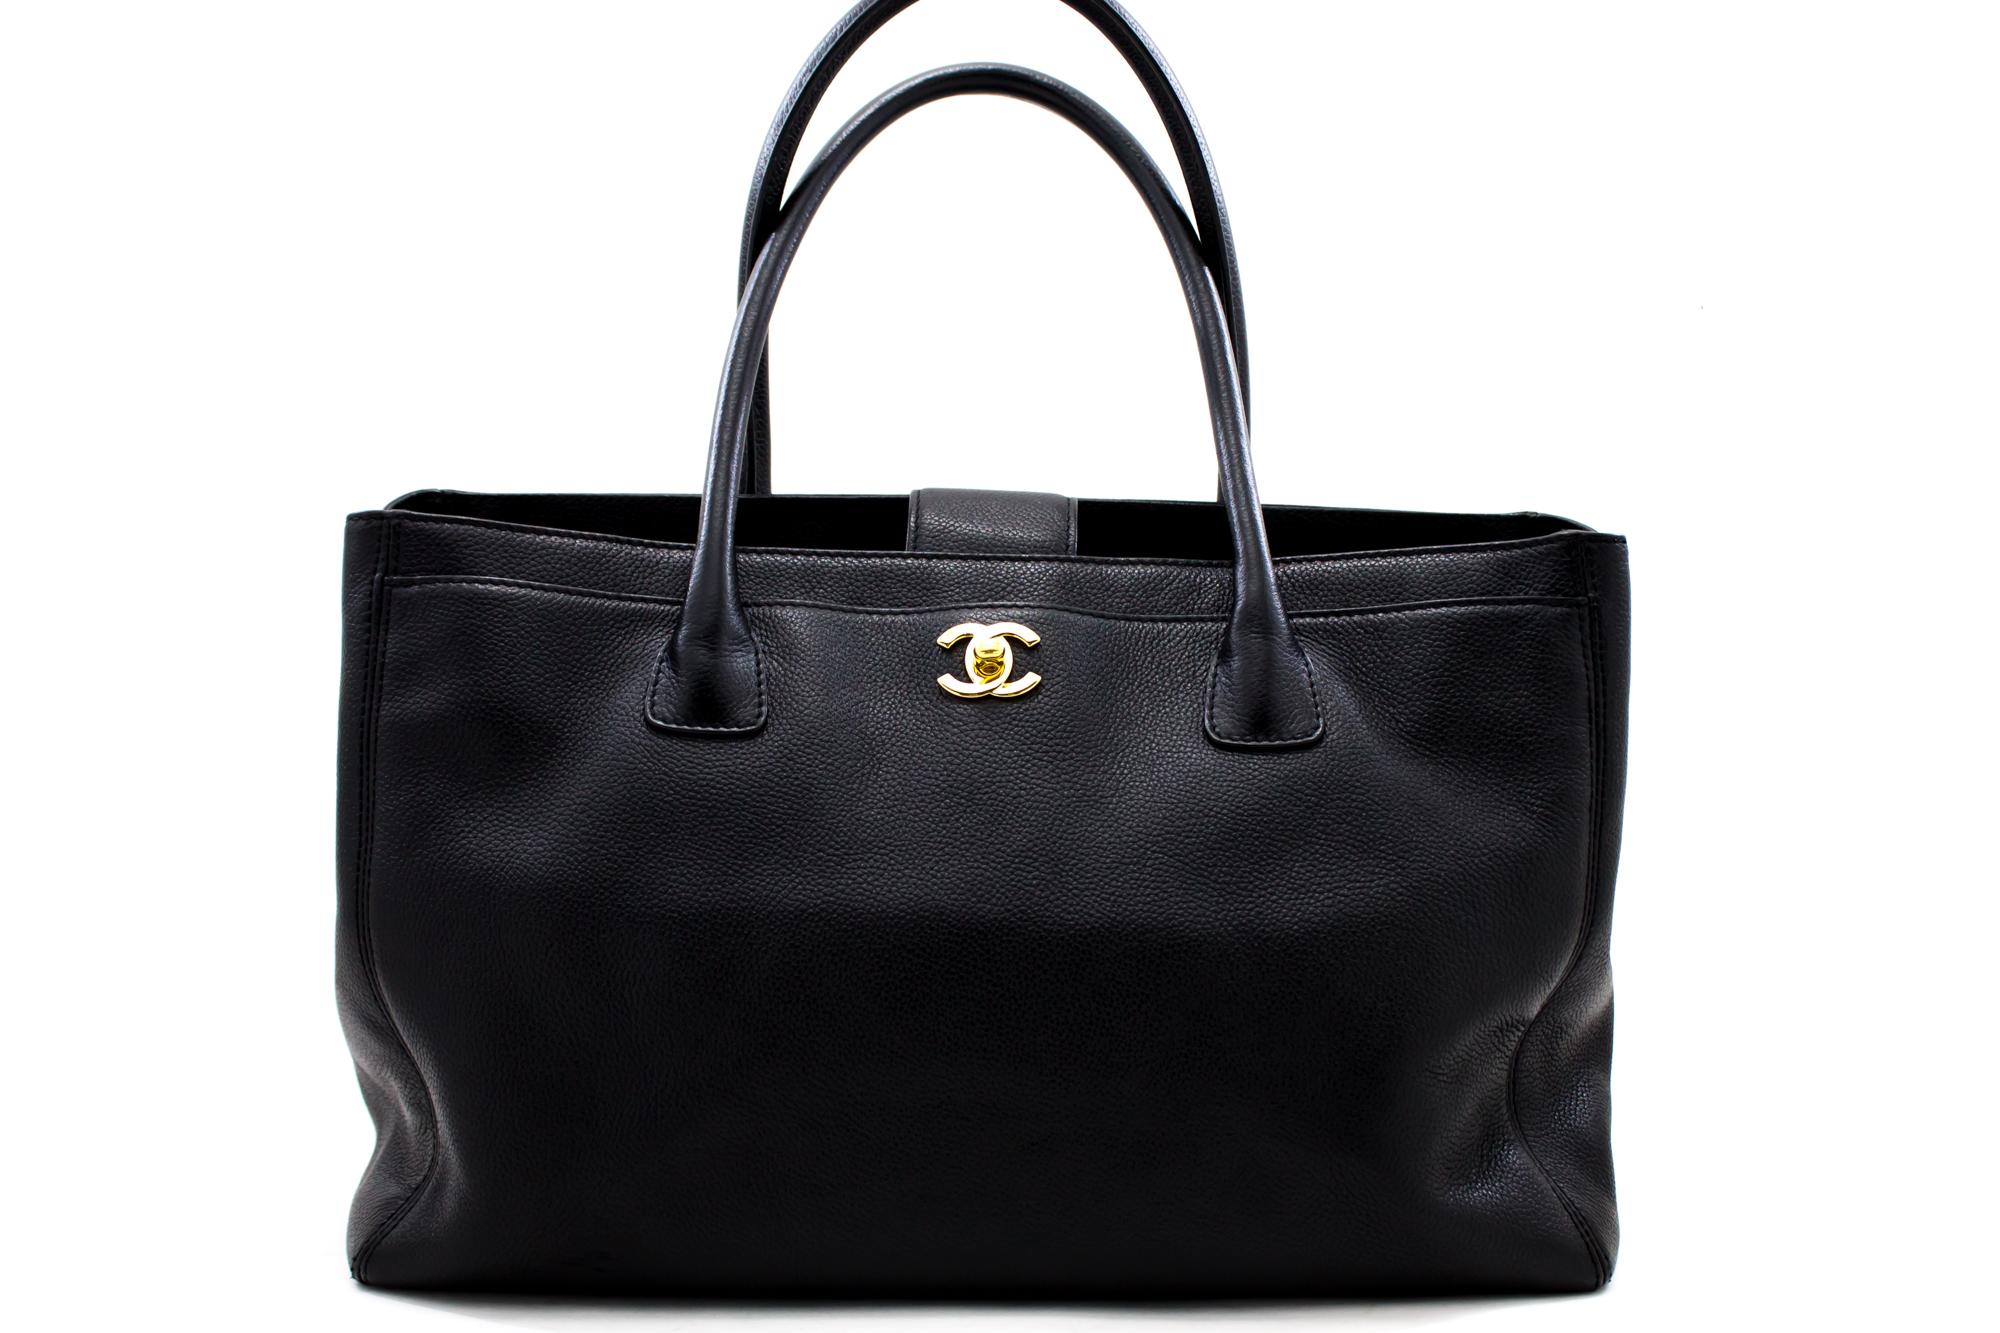 An authentic CHANEL Executive Tote Caviar Shoulder Bag Handbag Black Gold Strap. The color is Black. The outside material is Leather. The pattern is Solid. This item is Contemporary. The year of manufacture would be 2008.
Conditions &